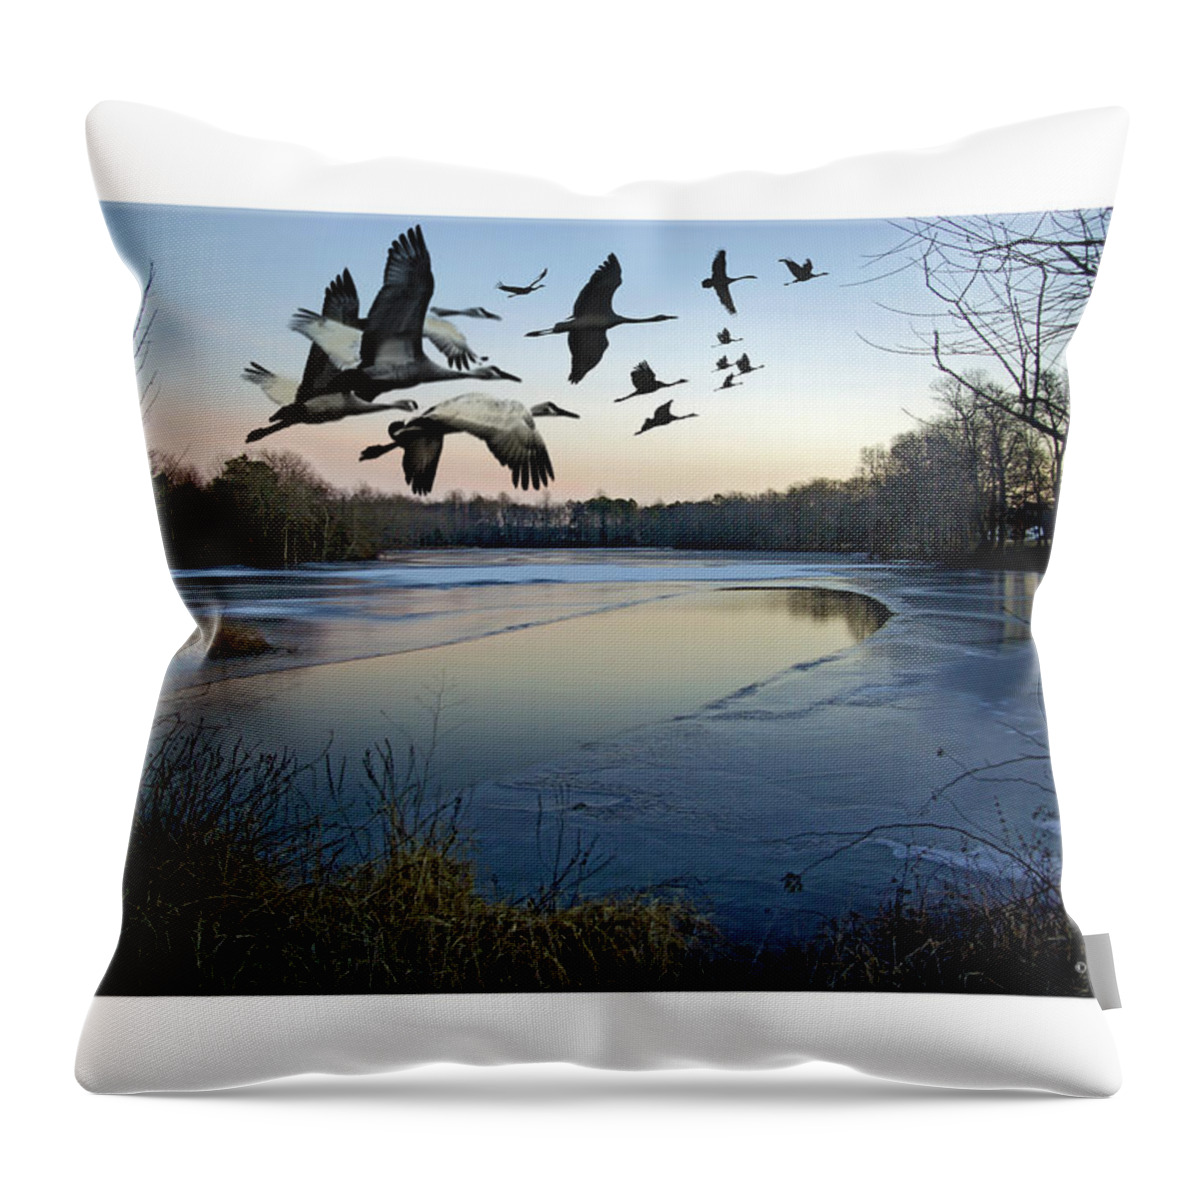 2d Throw Pillow featuring the photograph Freezing Landscape by Brian Wallace